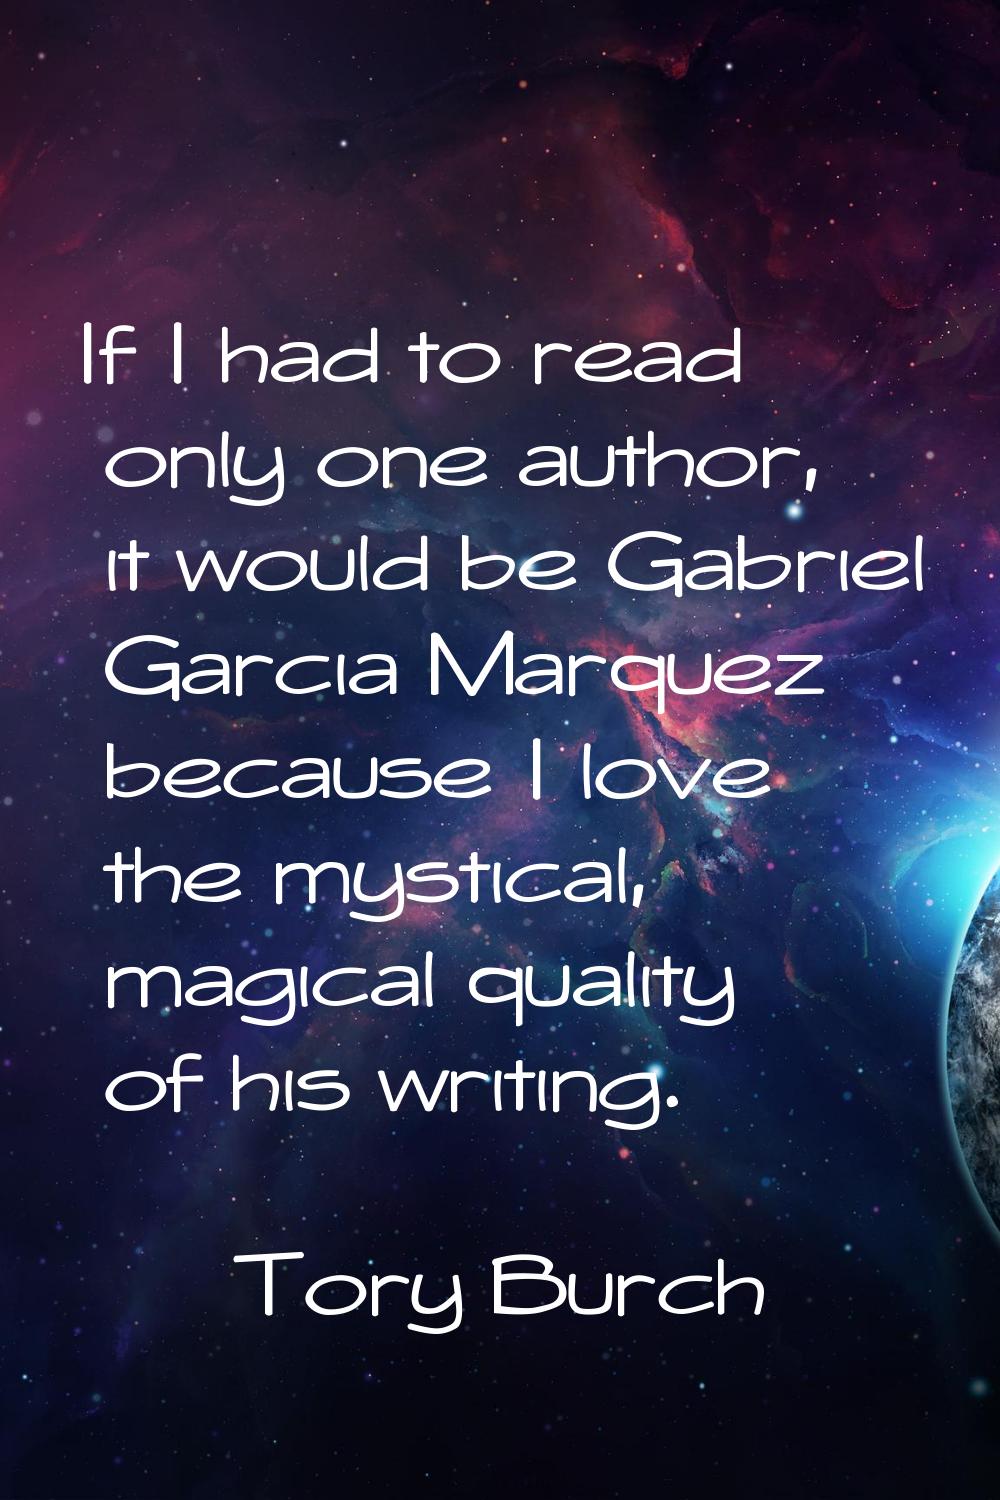 If I had to read only one author, it would be Gabriel Garcia Marquez because I love the mystical, m